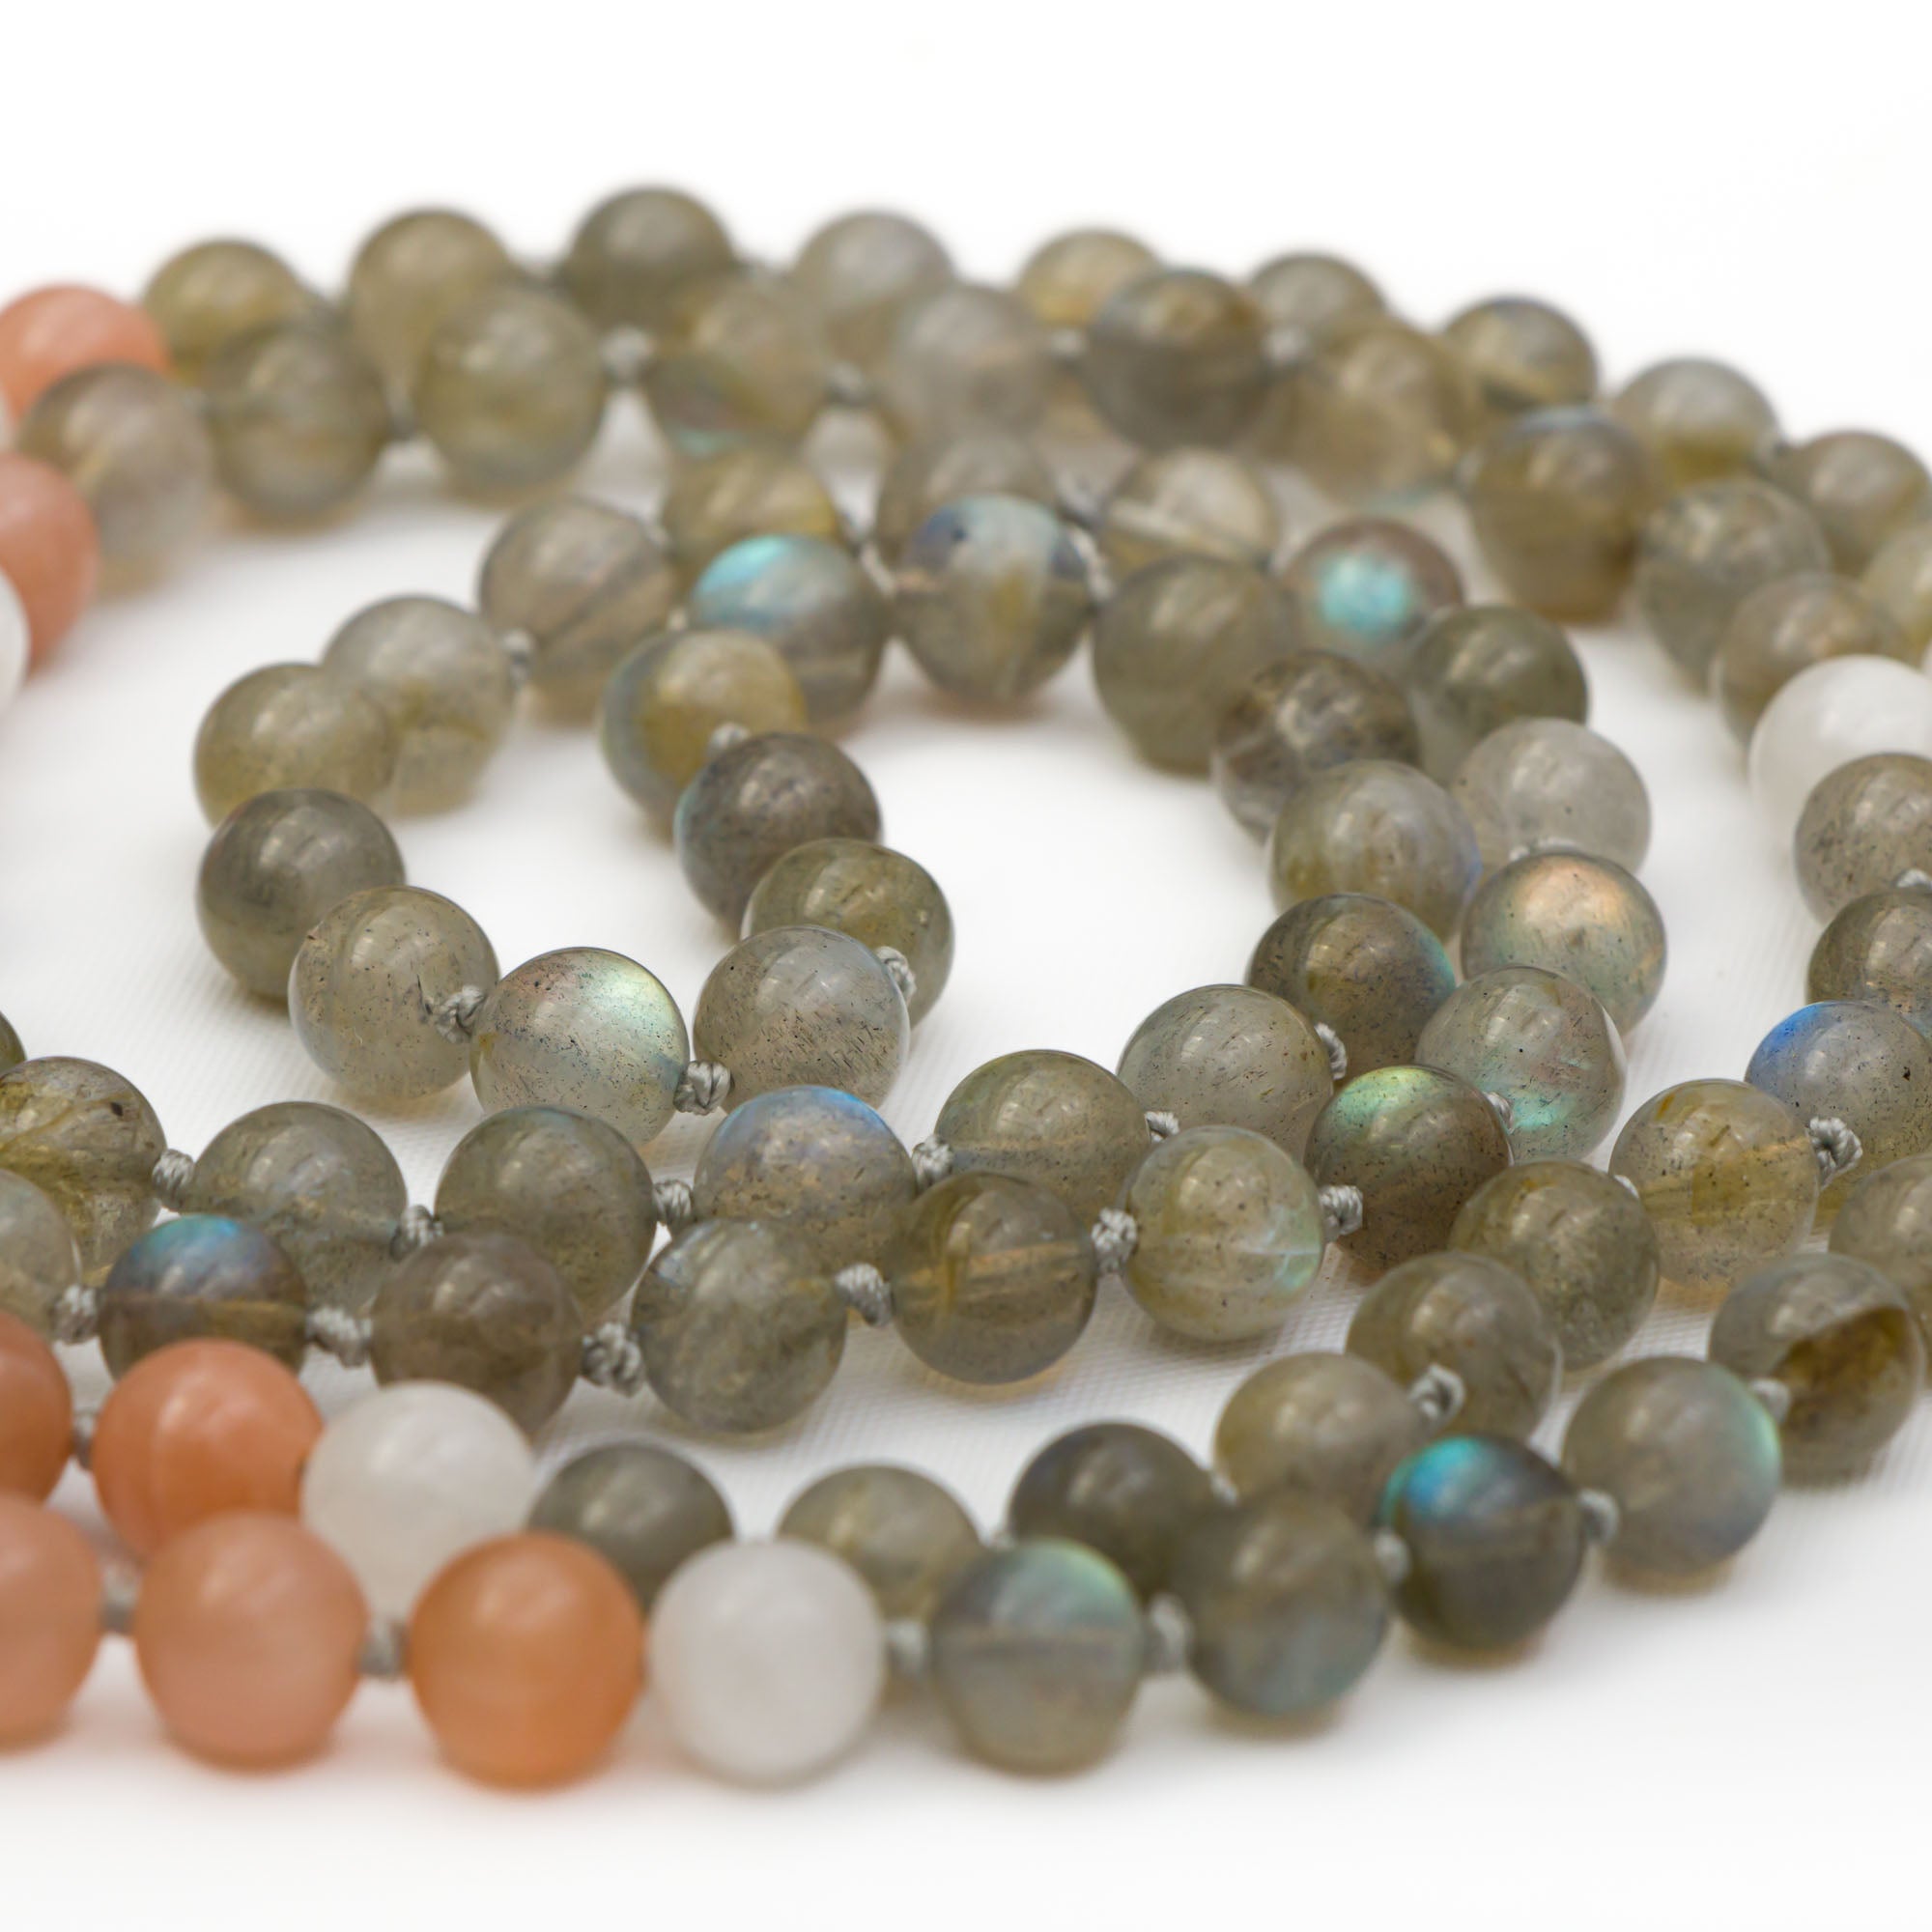 At Calm Buddhi we love our Japa Mala practice. Malas are